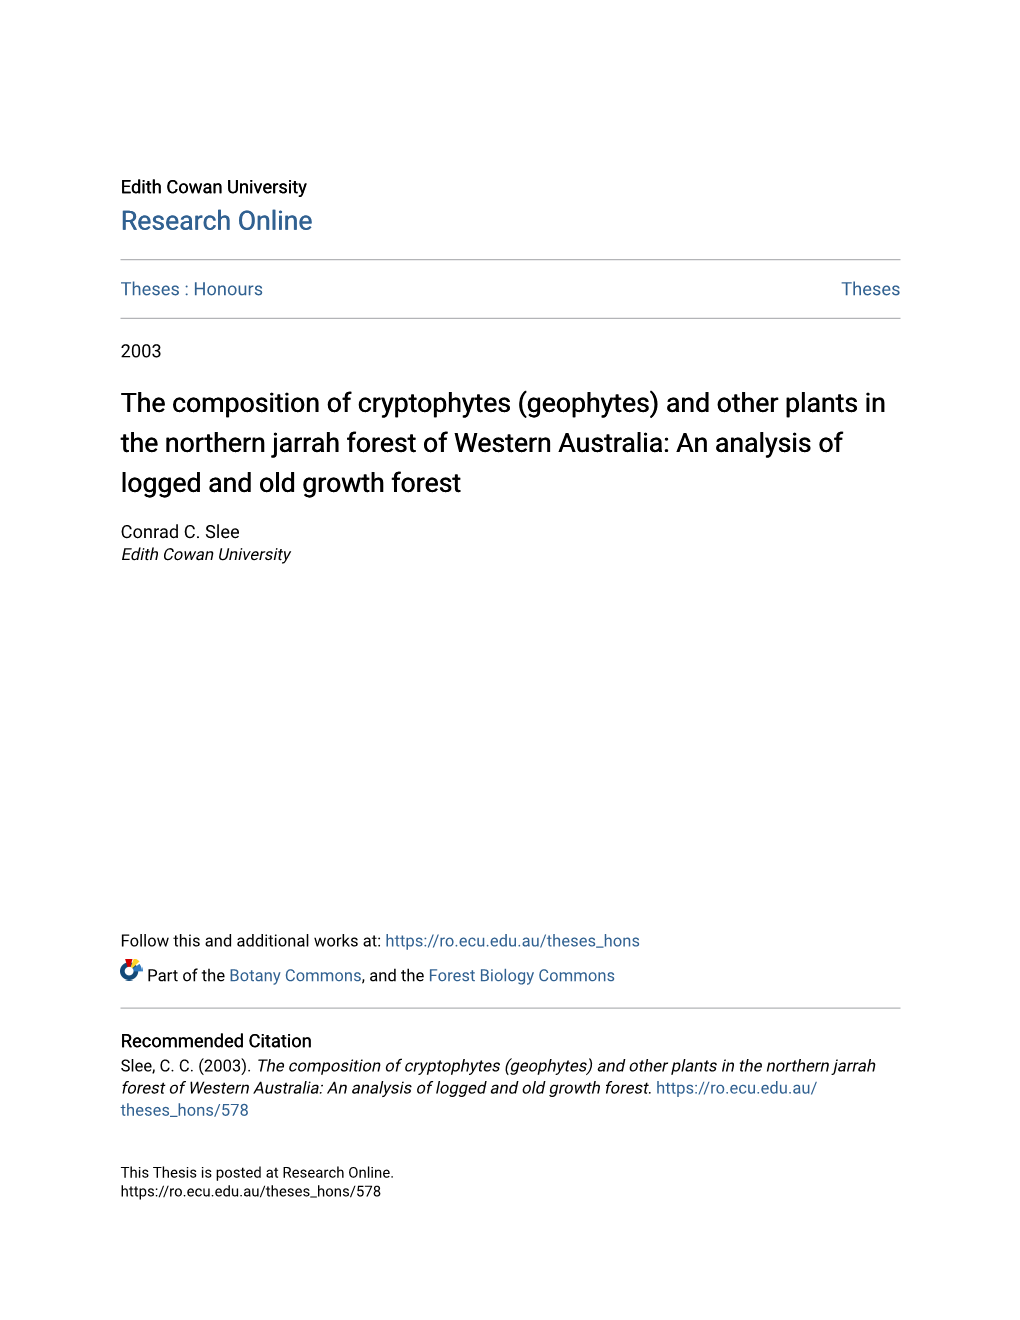 And Other Plants in the Northern Jarrah Forest of Western Australia: an Analysis of Logged and Old Growth Forest